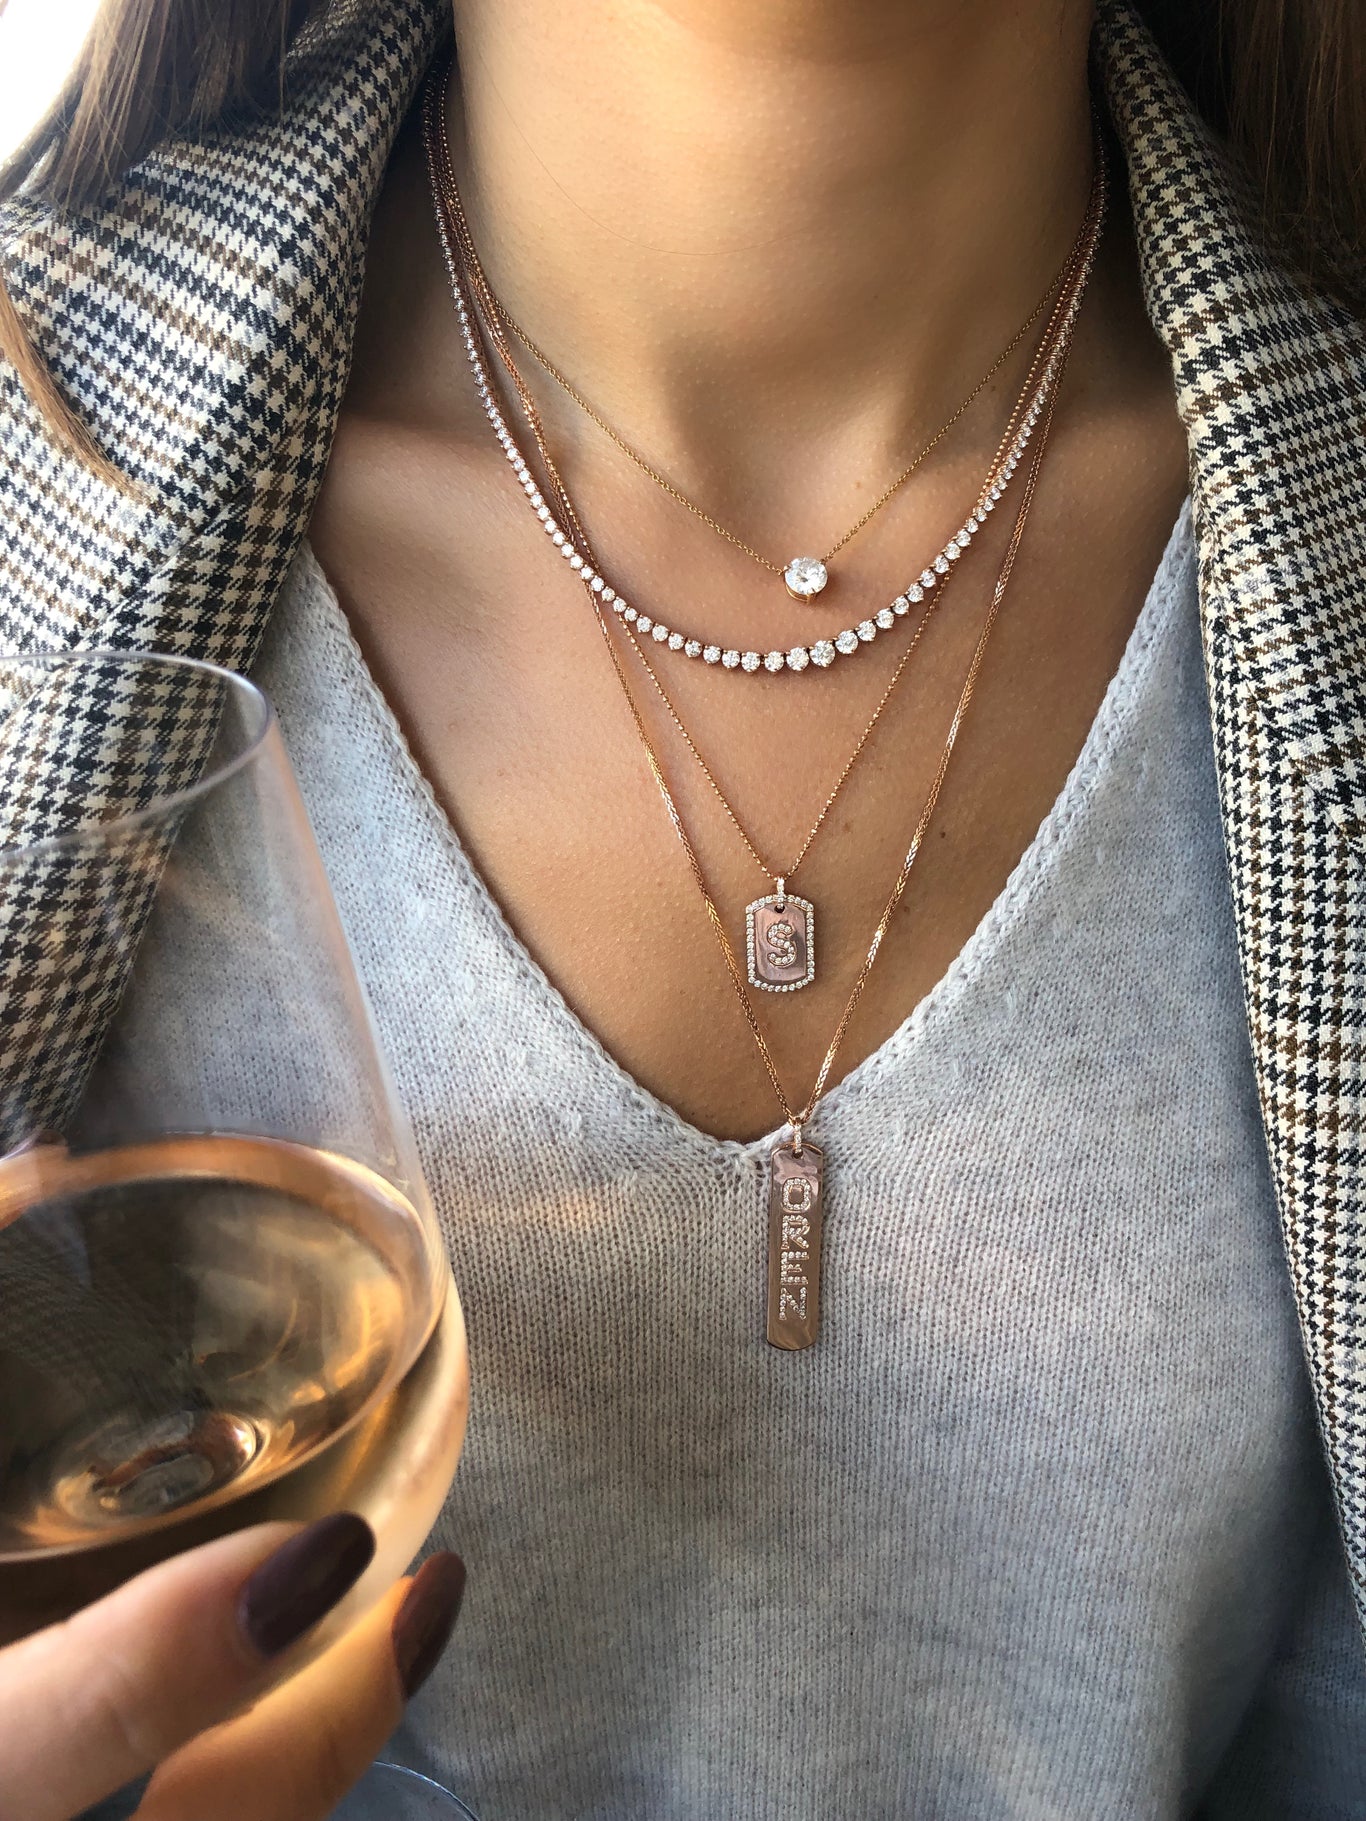 6.50 Carat Graduating Tennis Necklace shown layered between the Diamond Initial Dogtag Necklace and the Longtag Necklace.